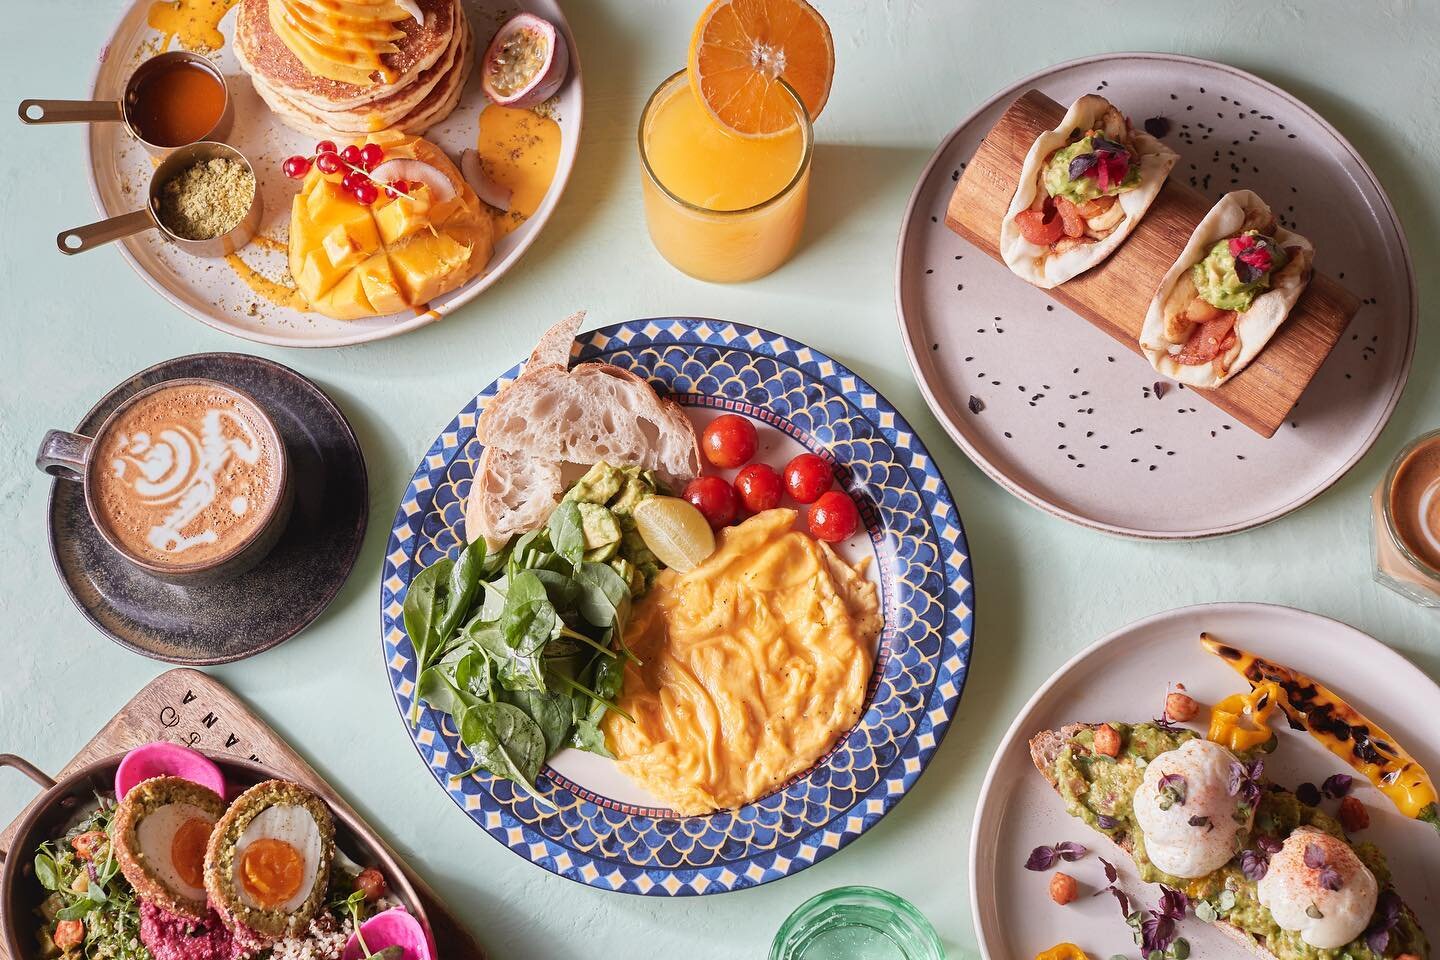 A Mexican breakfast menu as colorful as the culture itself 🇲🇽 

#menukuwait #mexicancuisine